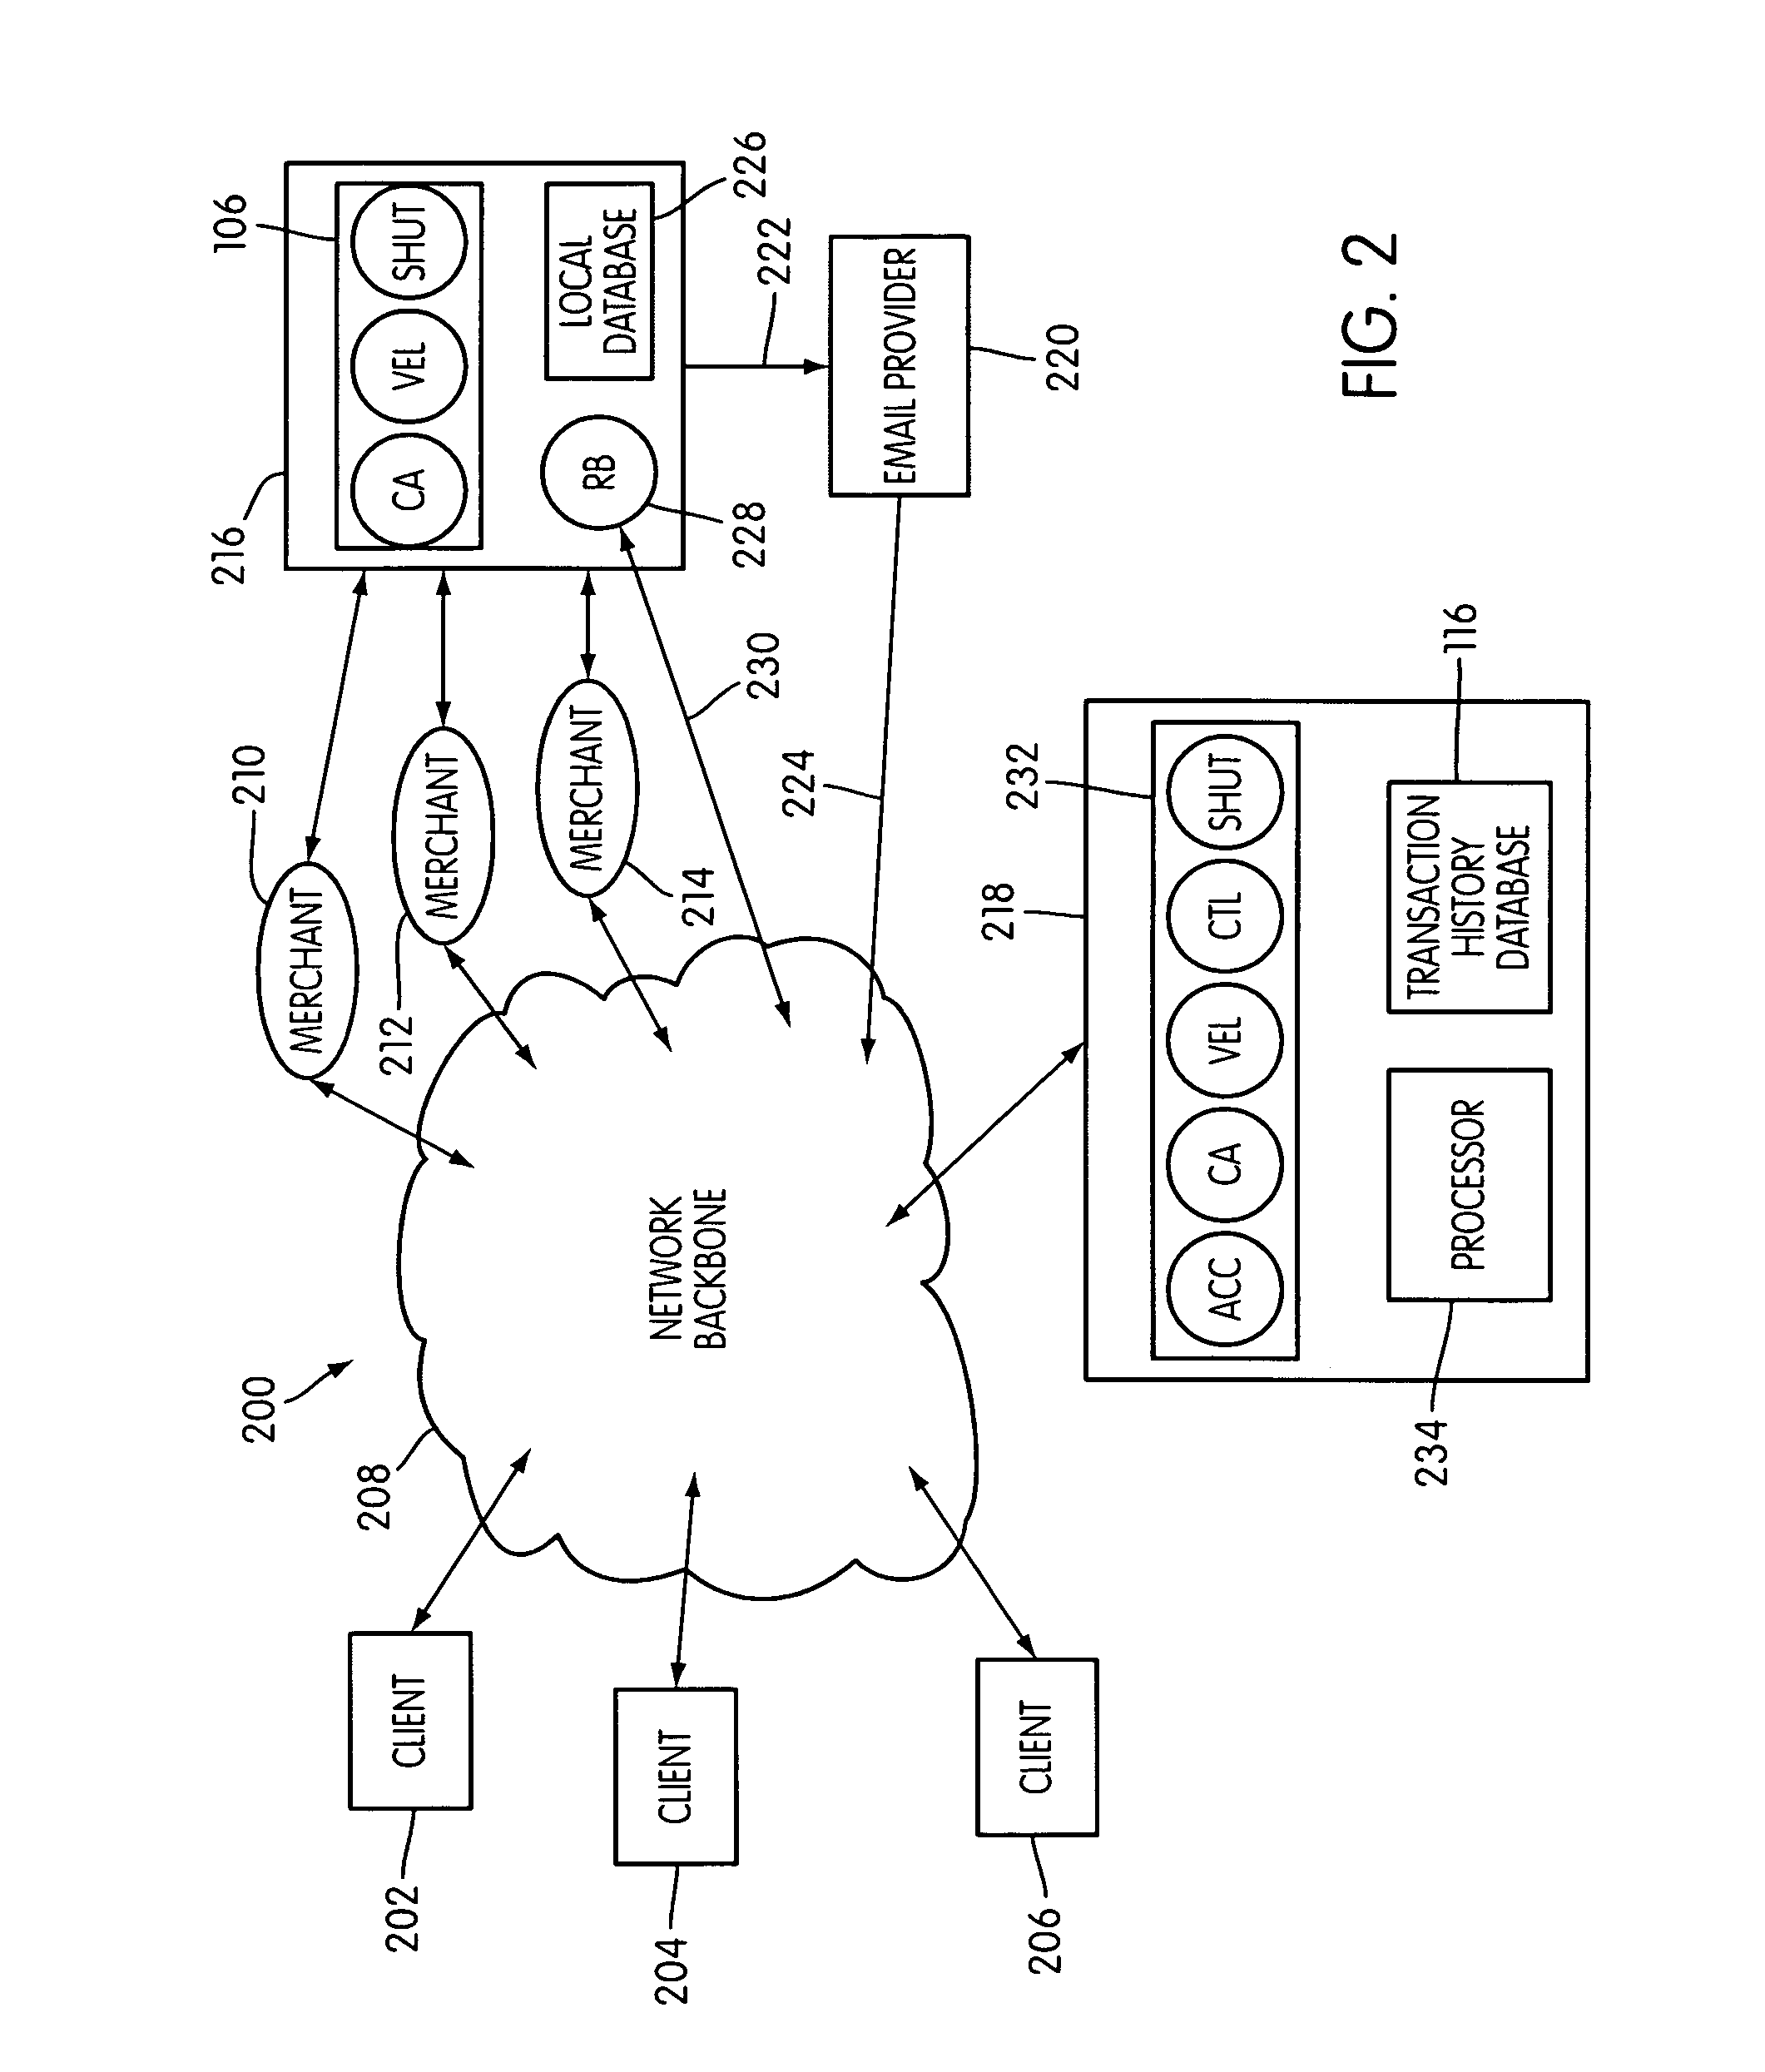 System and method for determining the level of a authentication required for redeeming a customer's award credits